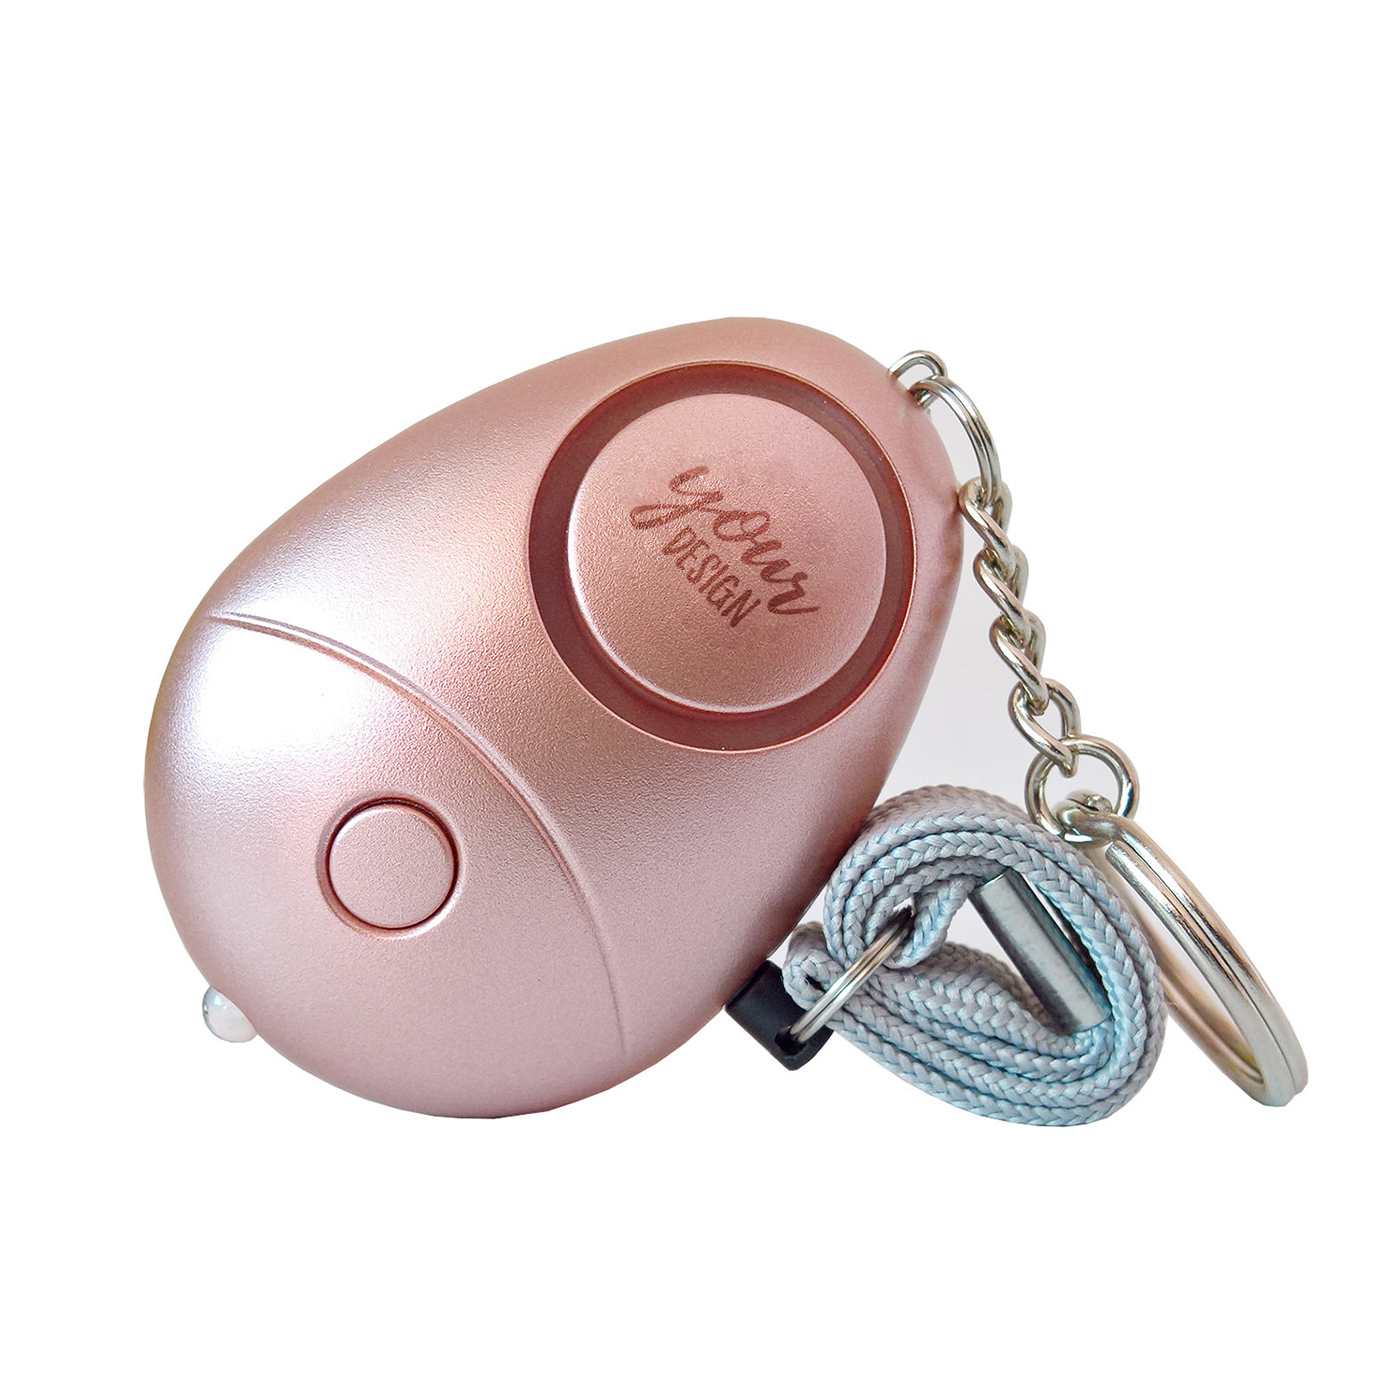 Personal Security Alarm Keychain With LED Light1